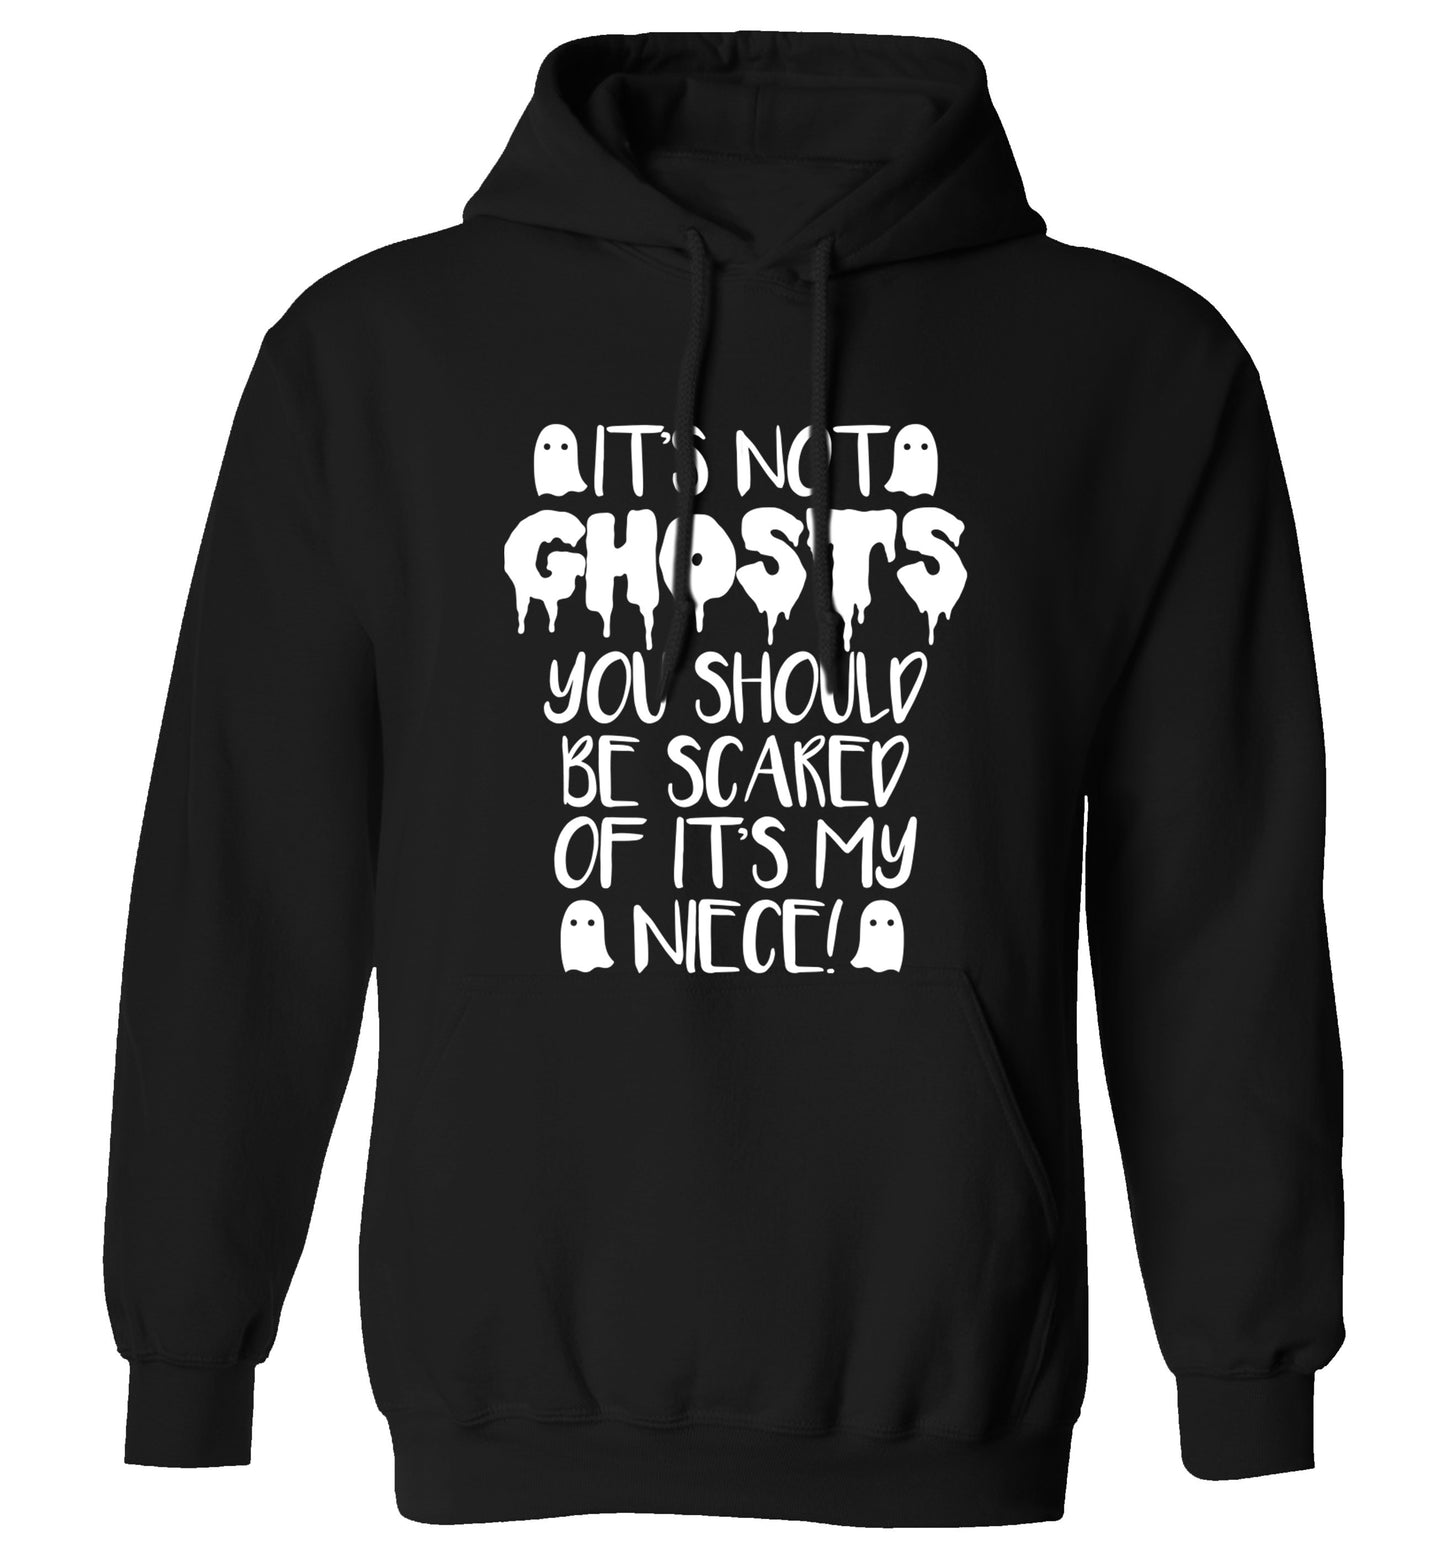 It's not ghosts you should be scared of it's my niece! adults unisex black hoodie 2XL